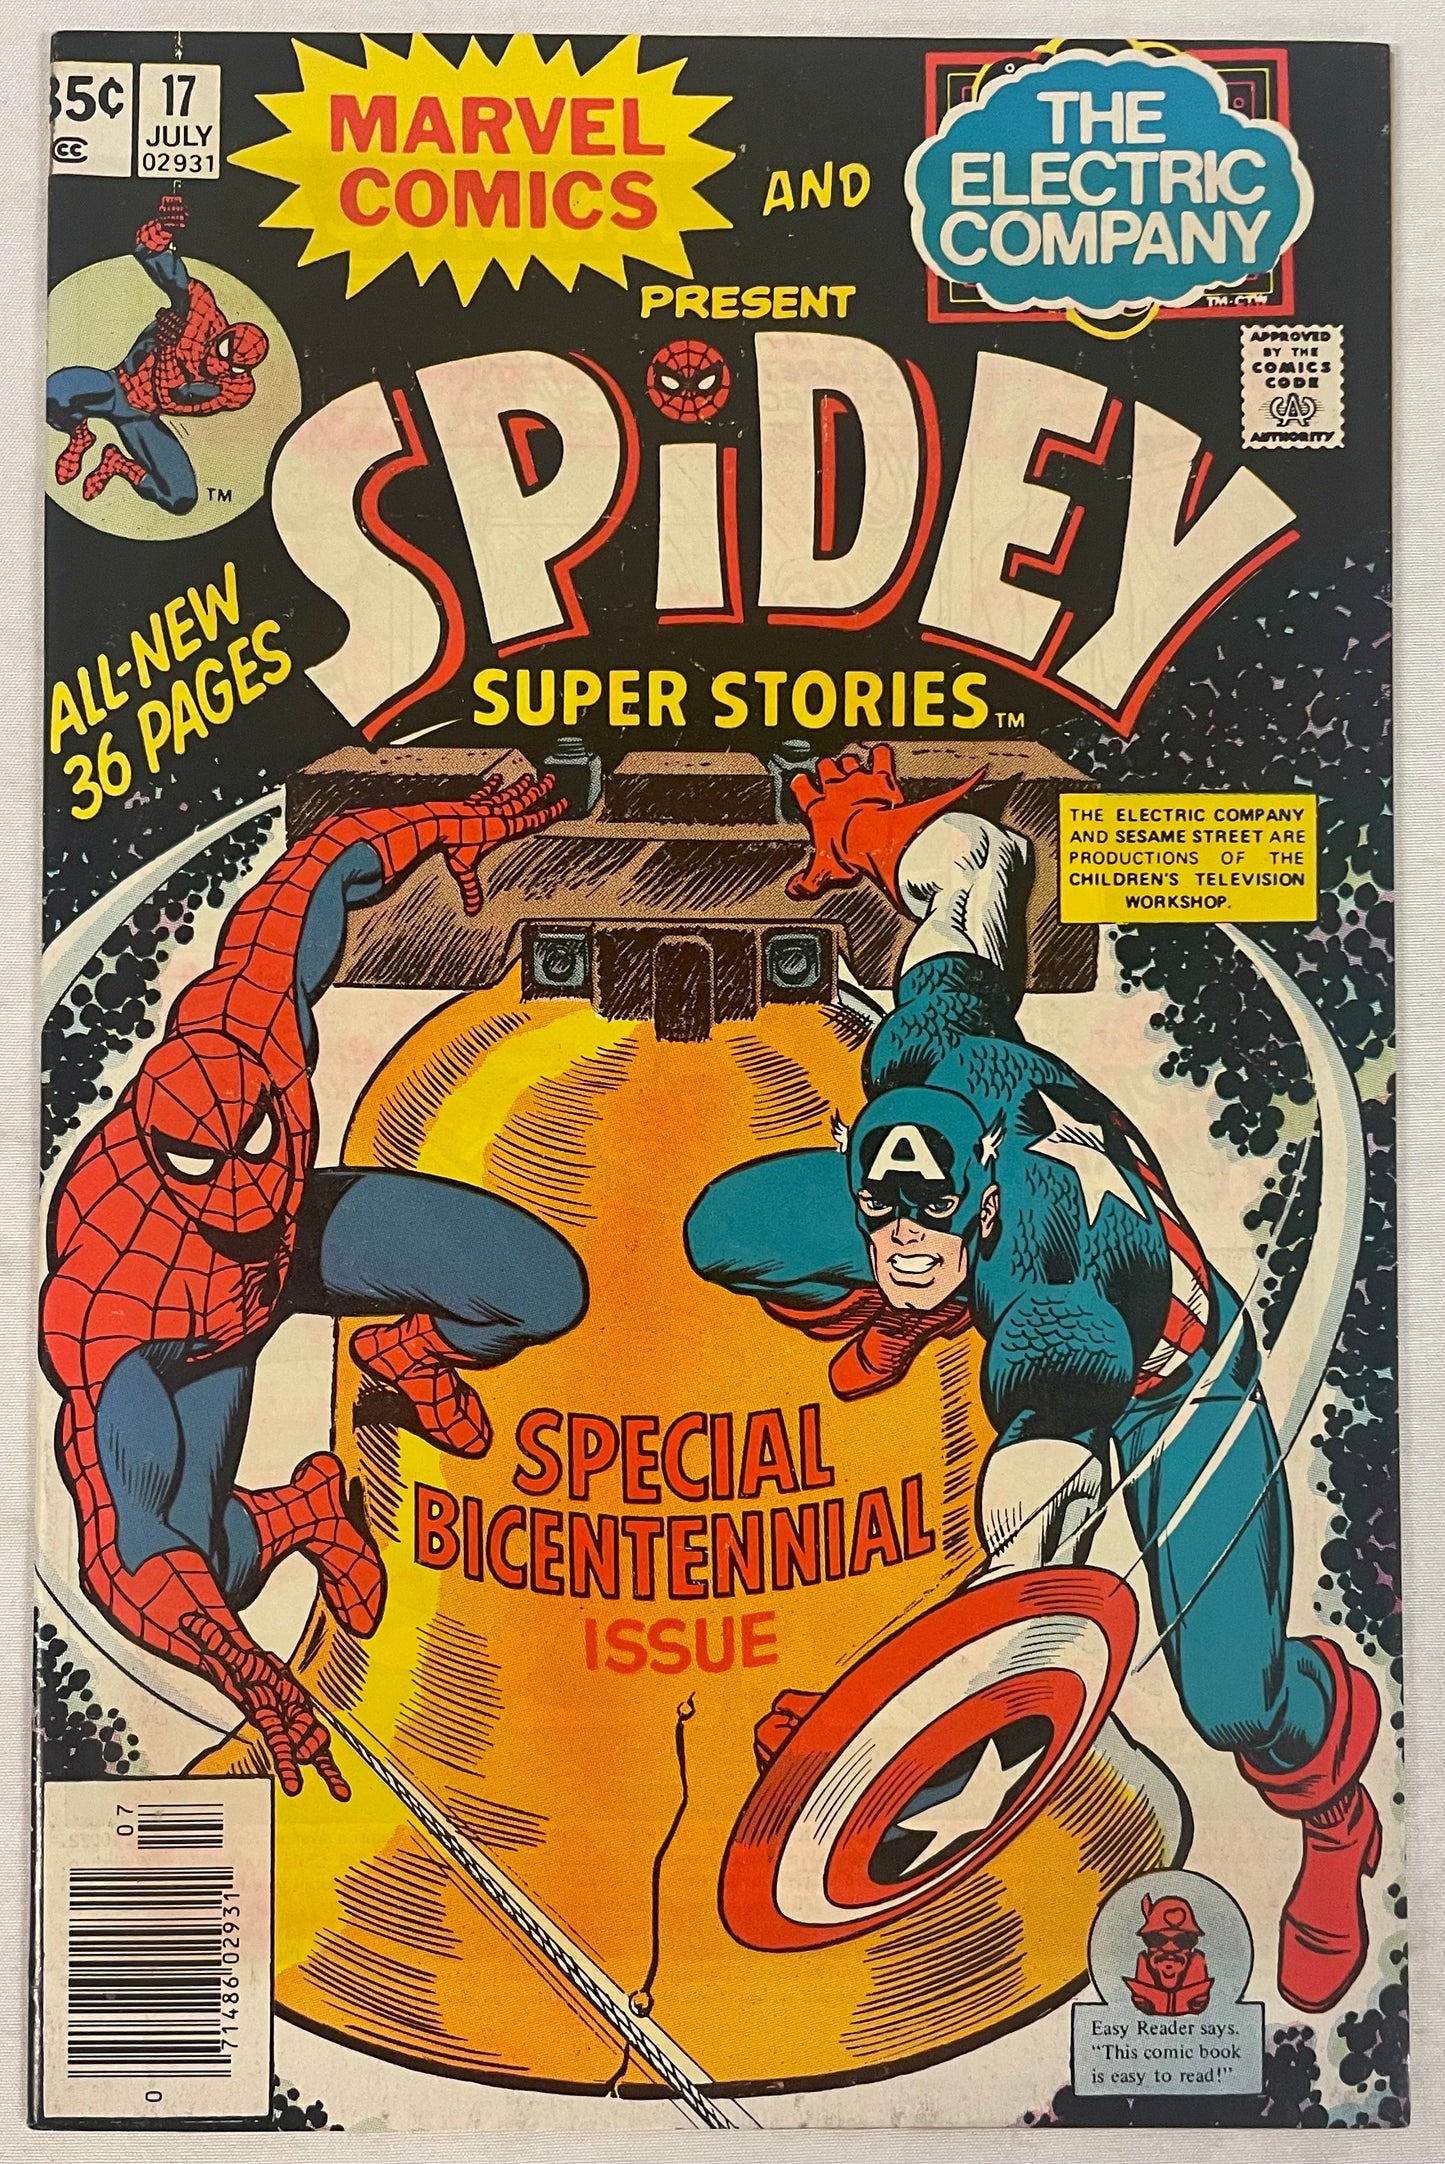 Marvel Comics And The Electric Company Presents Spidey Super Stories #17